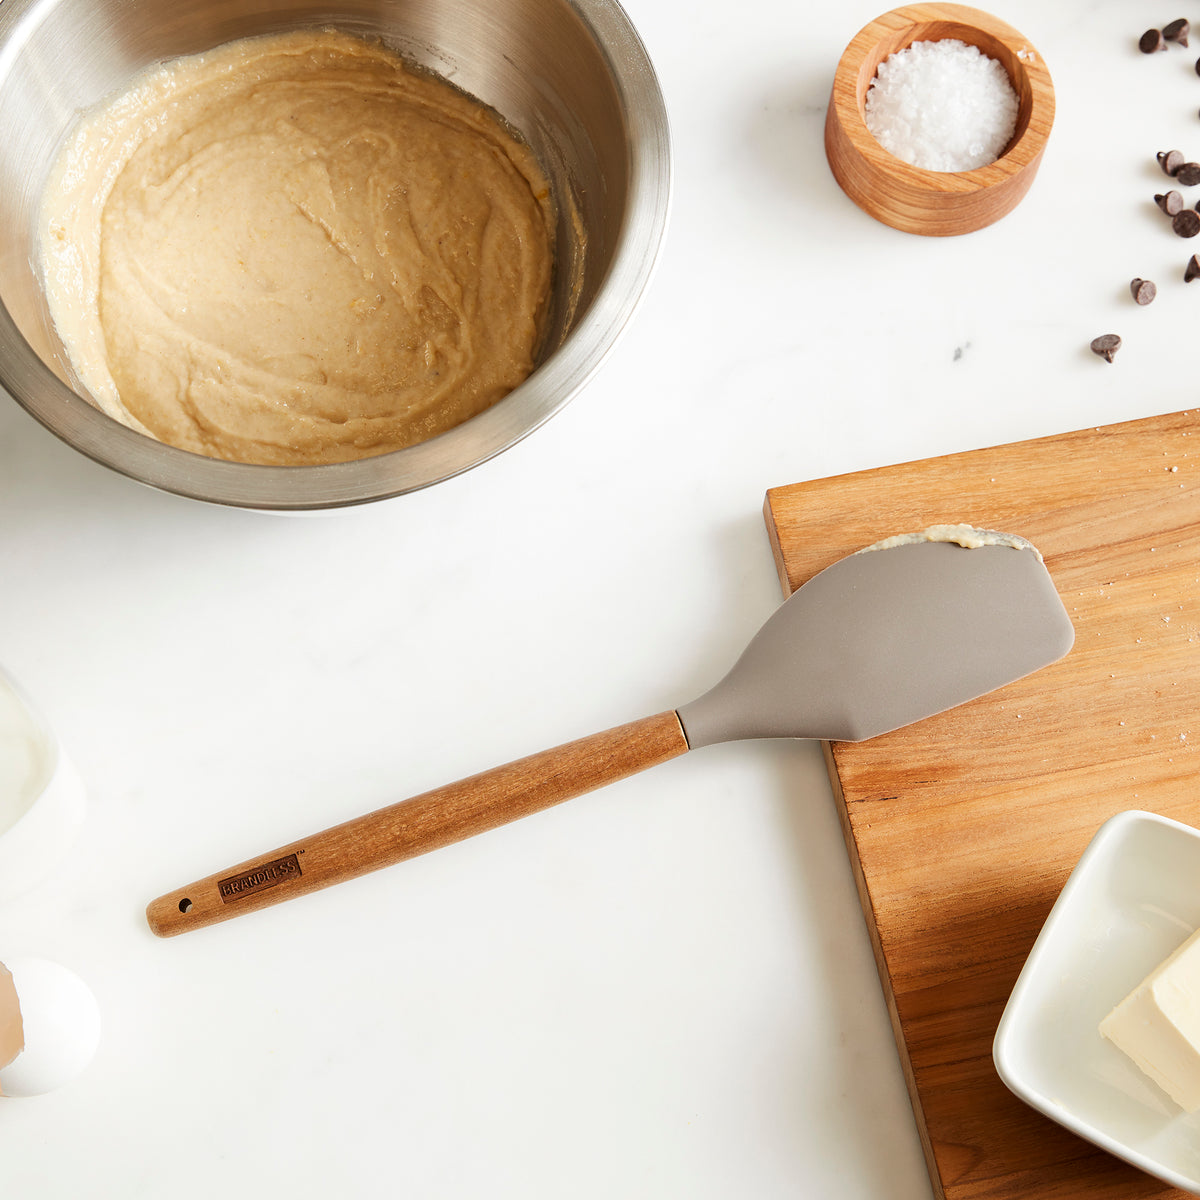 Lifestyle photo, silicone spatula with vestiges of cake batter rests on cutting board next to a mixing bowl full of cake batter.